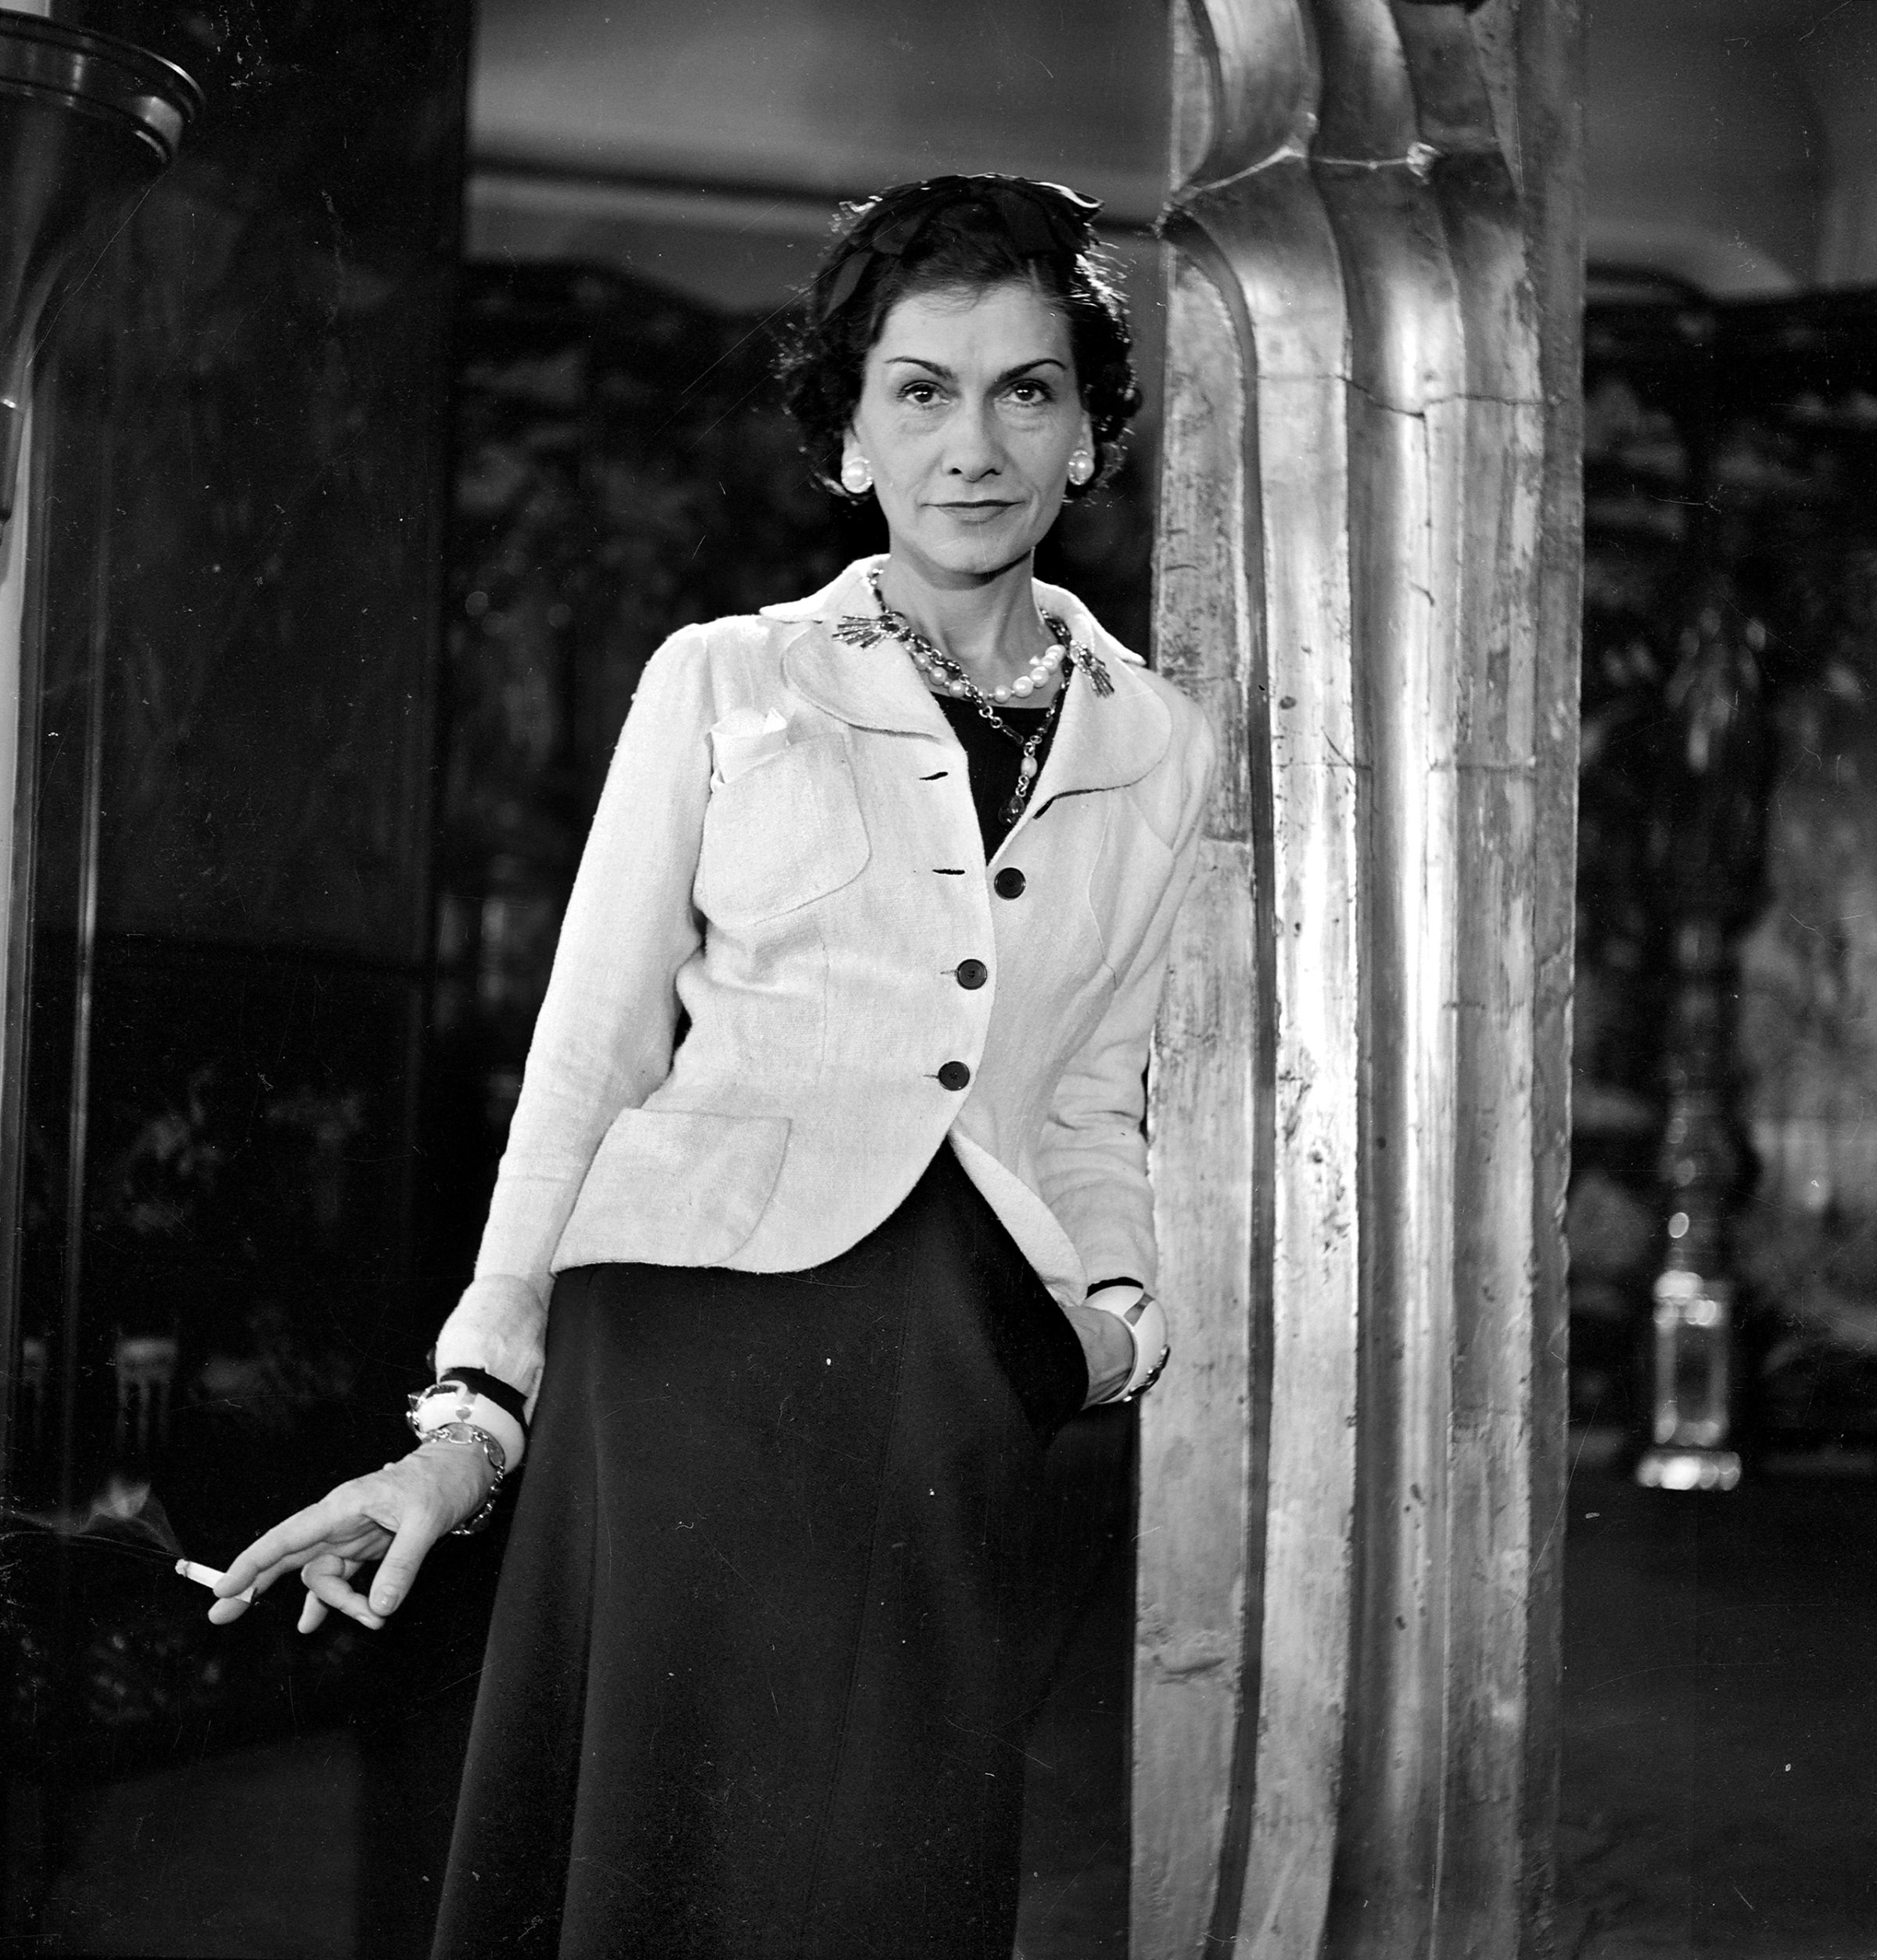 Coco Chanel, French couturier. Paris, 1937.